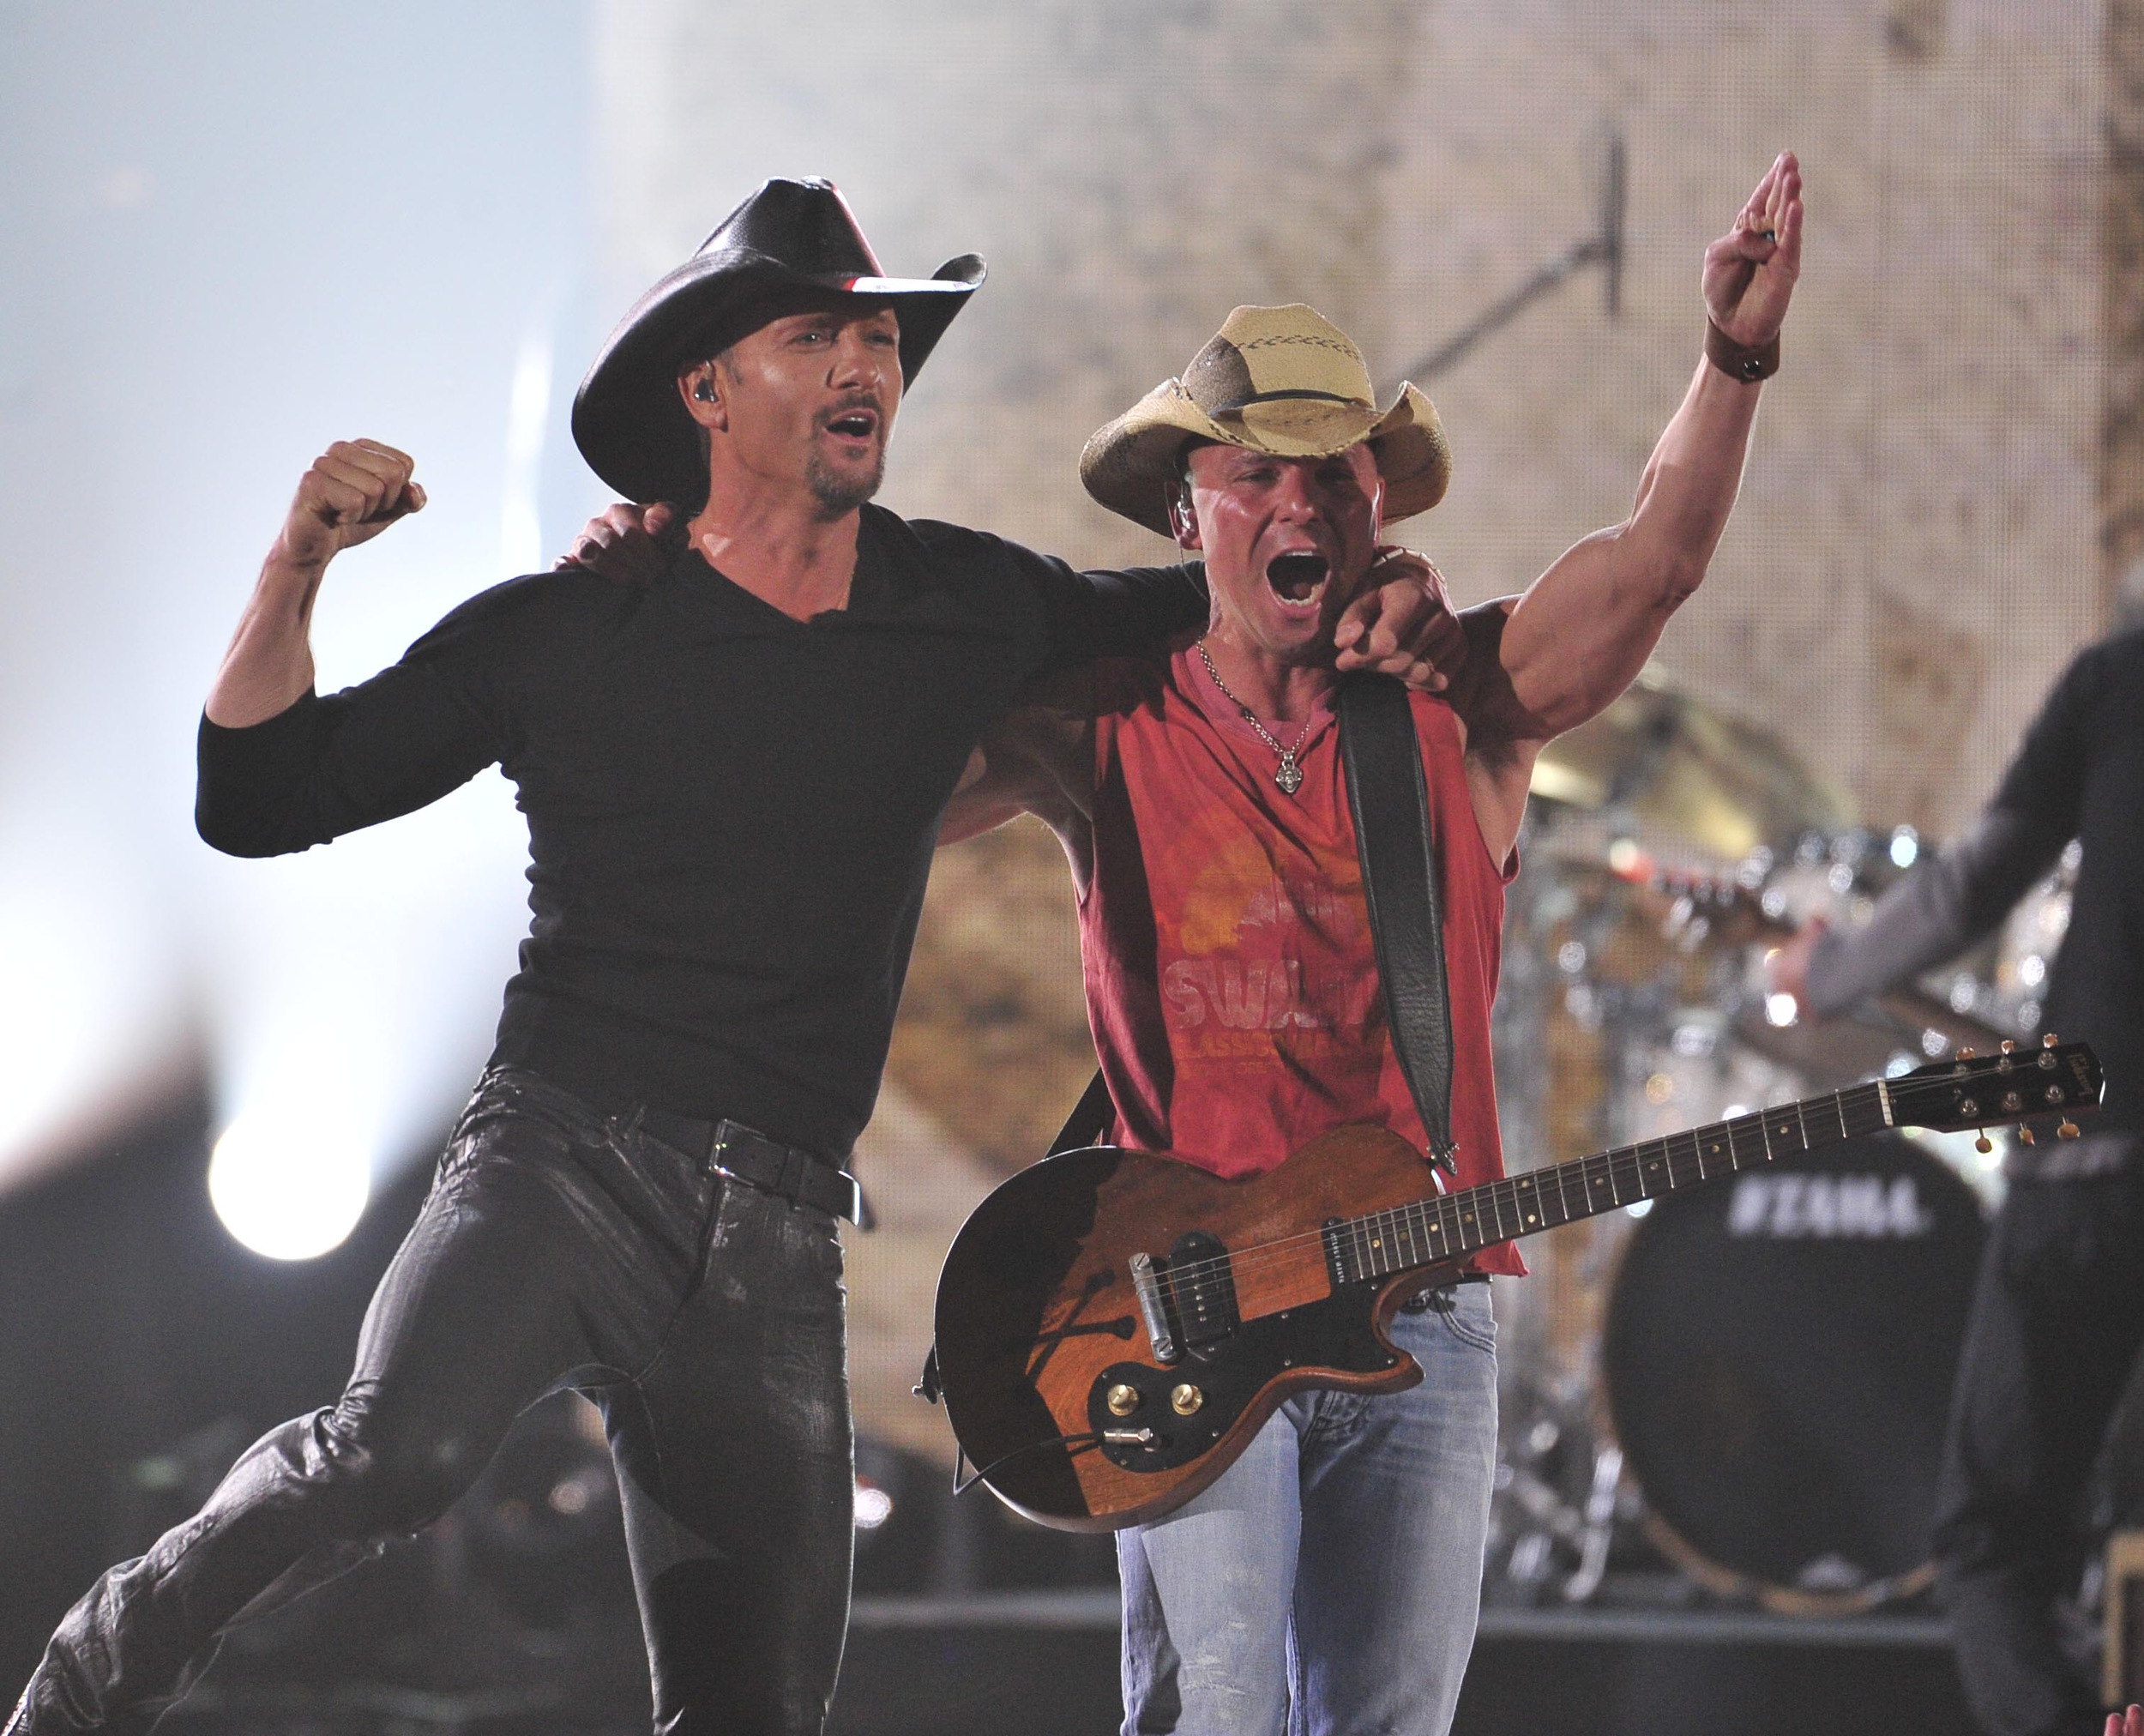  Kenny Chesney and Tim McGraw perform at the ACM Awards at the MGM Grand April 1, 2012 in Las Vegas, Nev. 